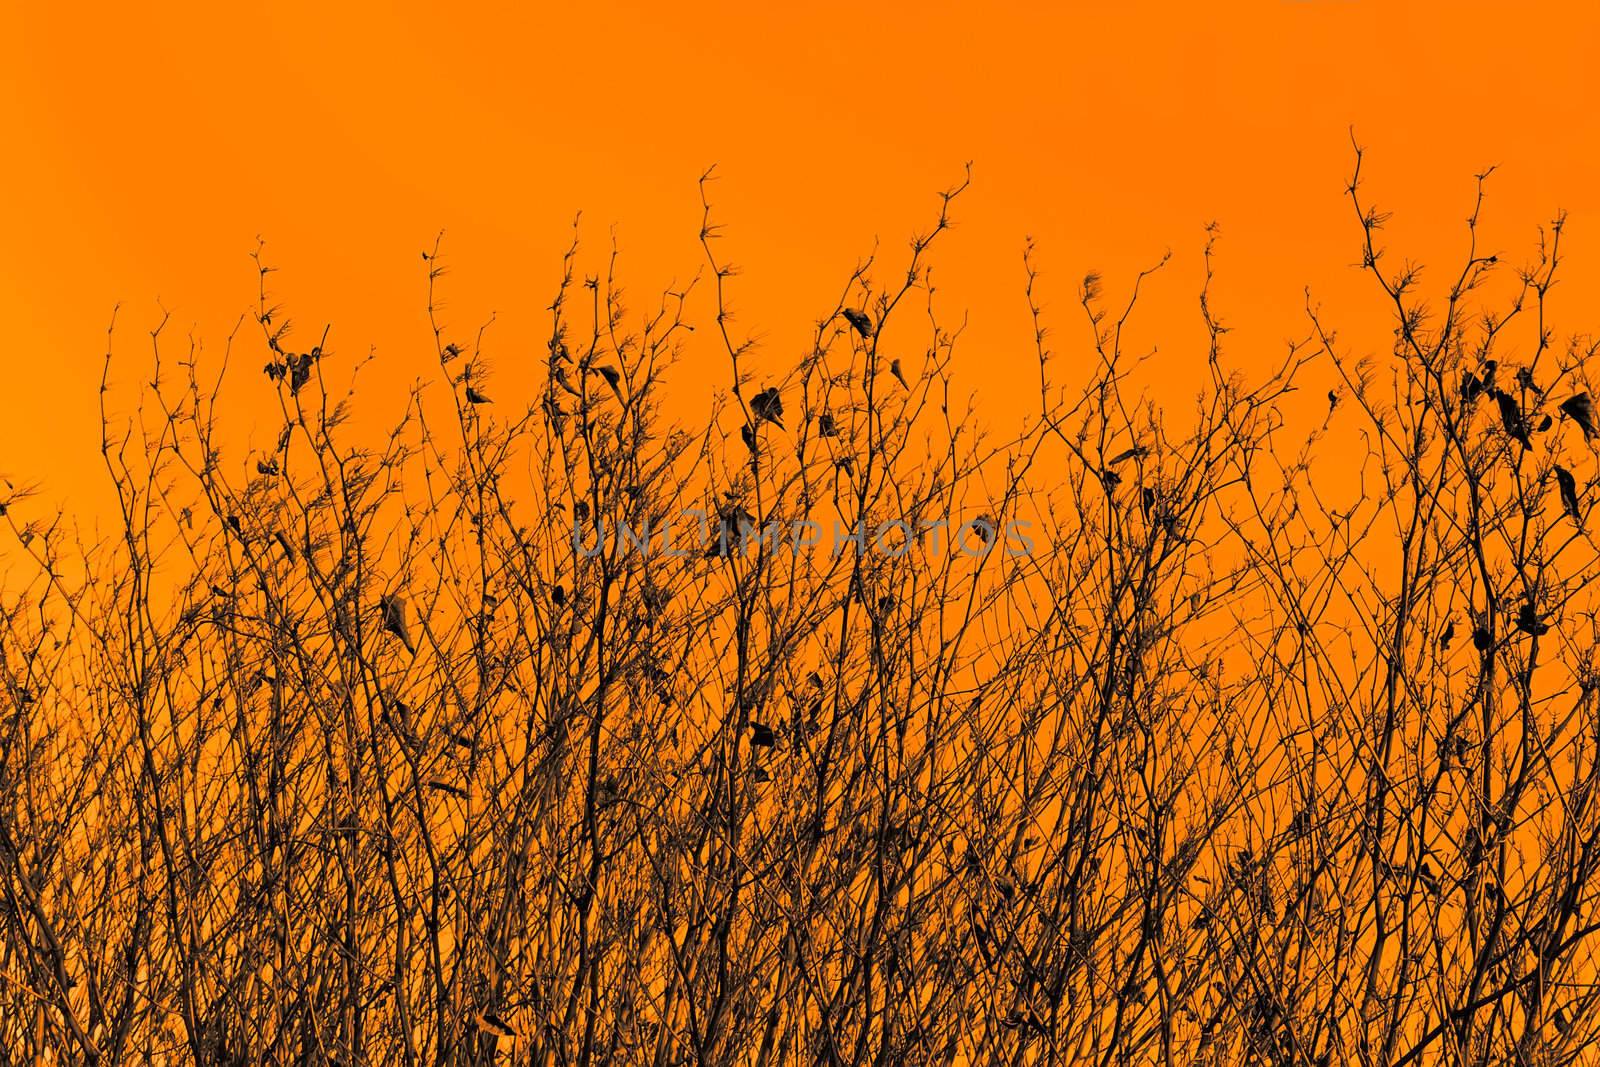 Silhouettes of dried high grassy plants against the orange sepia background 